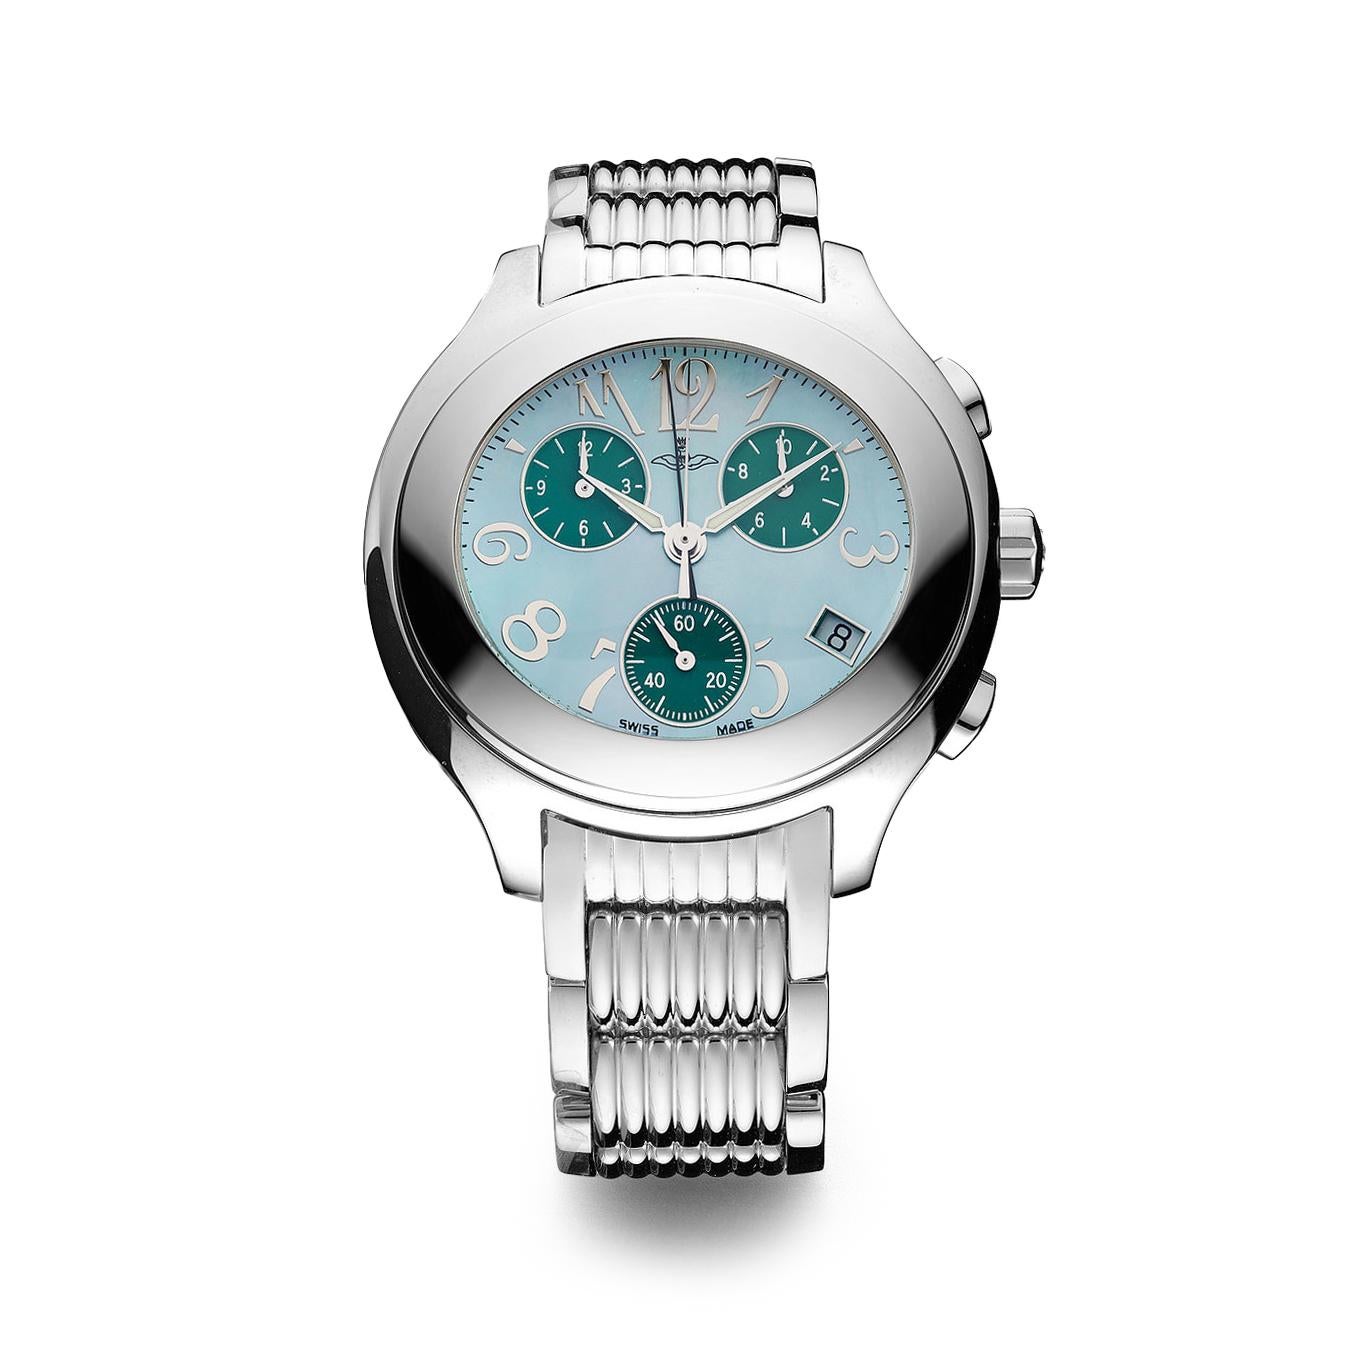 Chronograph watch in steel set with green mother of pearl dial steel bracelet quartz movement.